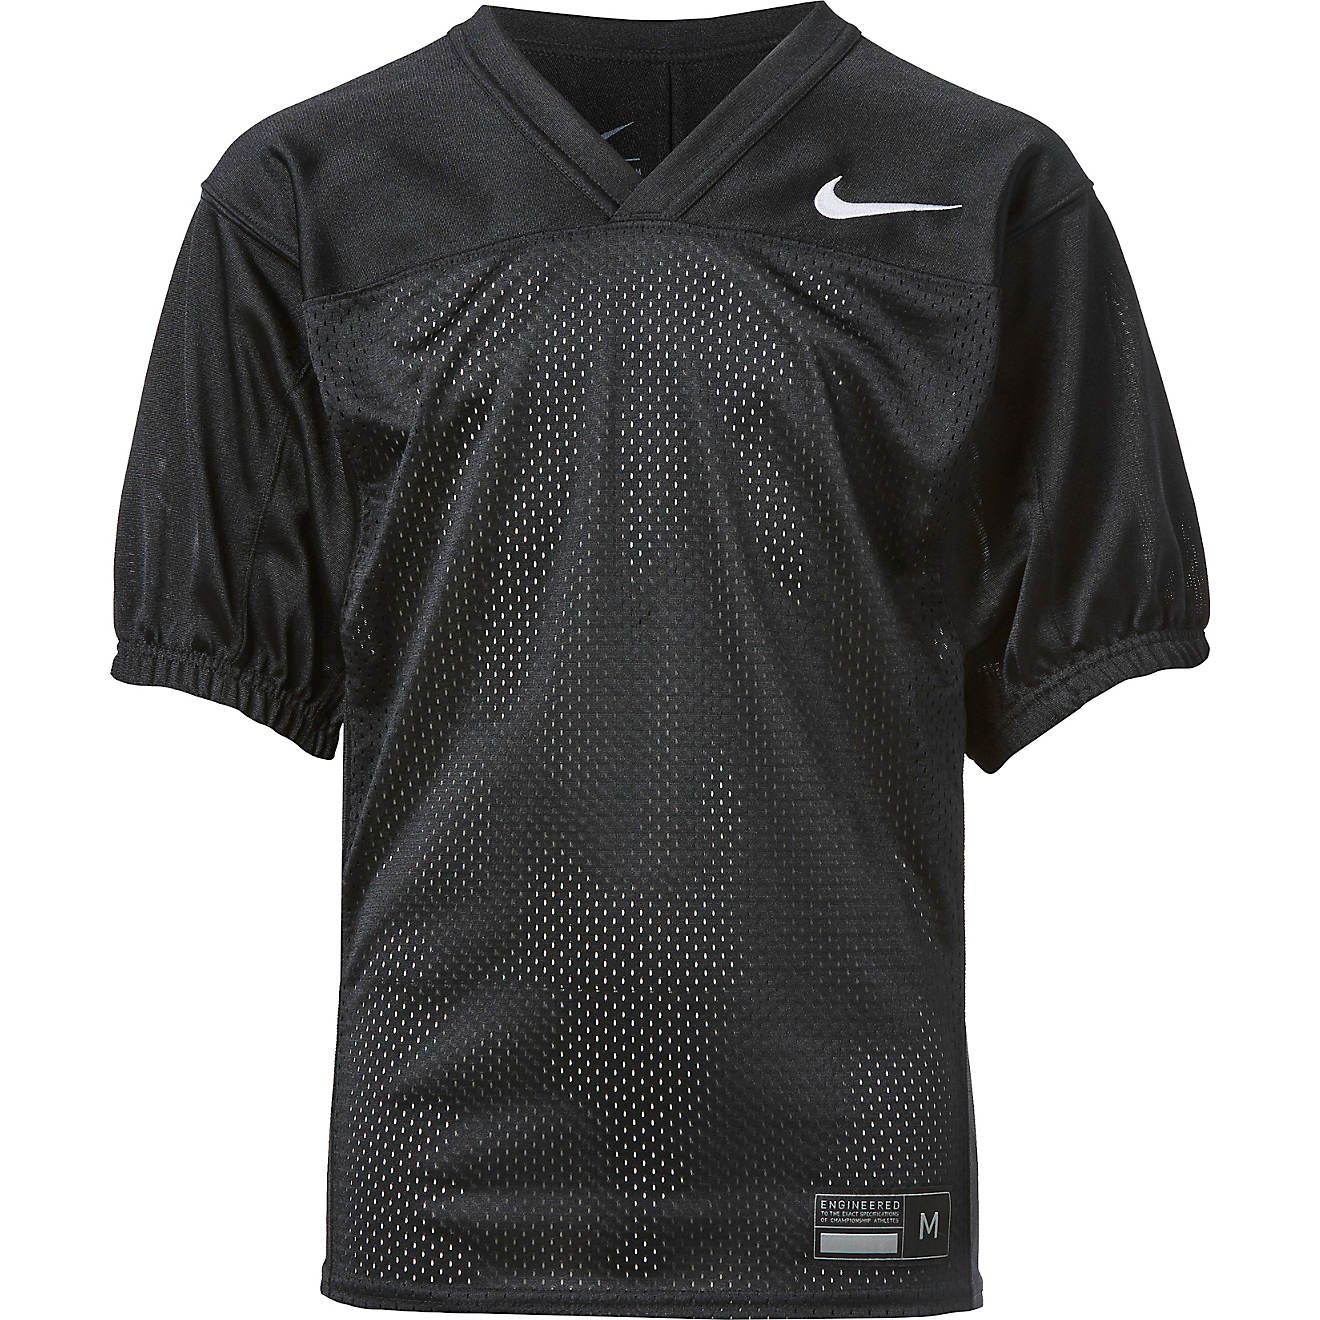 Nike Boys' Recruit Practice Football Jersey | Academy Sports + Outdoor Affiliate